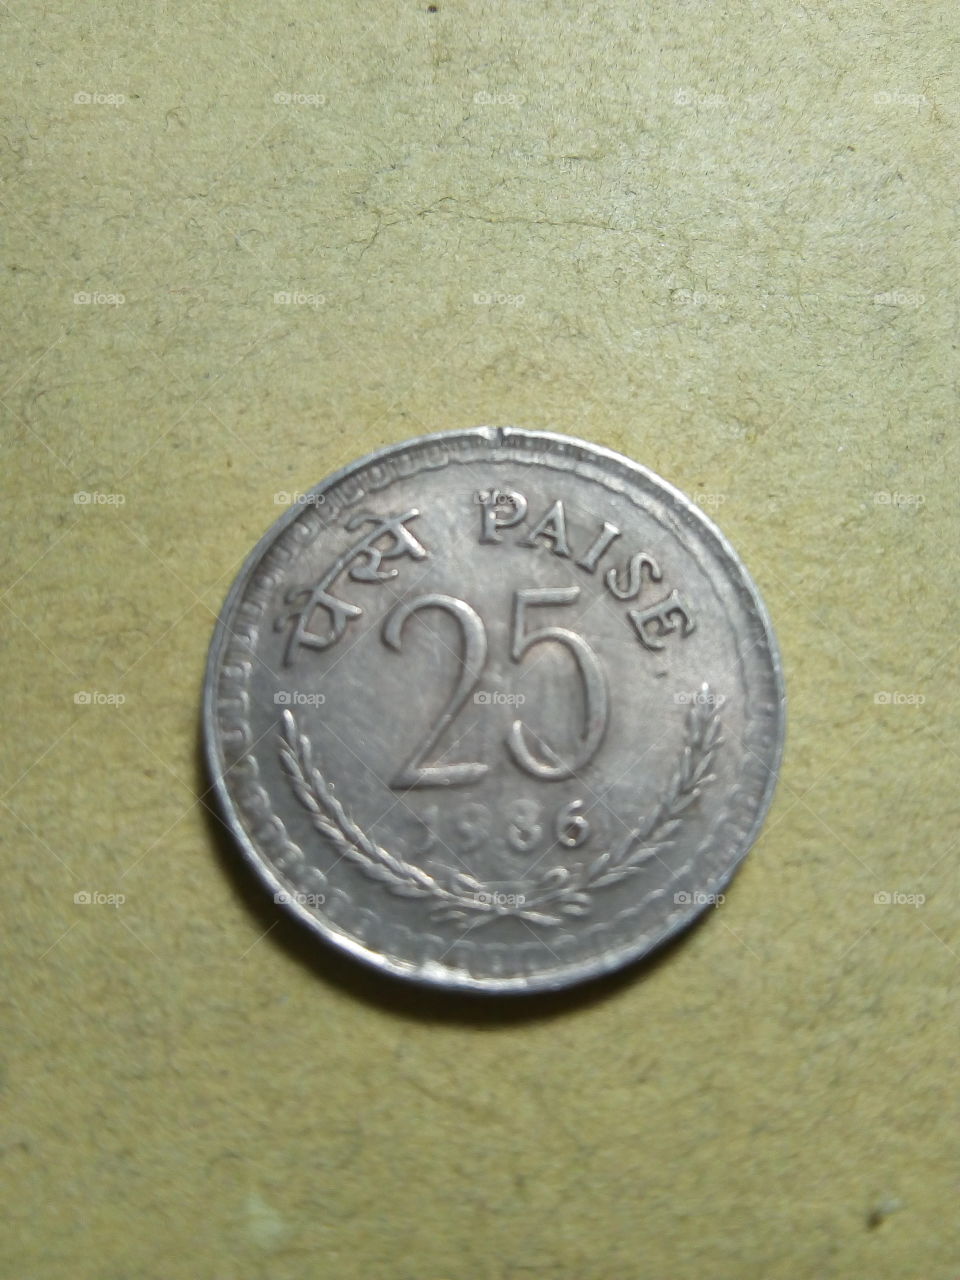 A coin of twenty five paise- 1/4 share of Indian Rupee issued by Government of India in 1986.